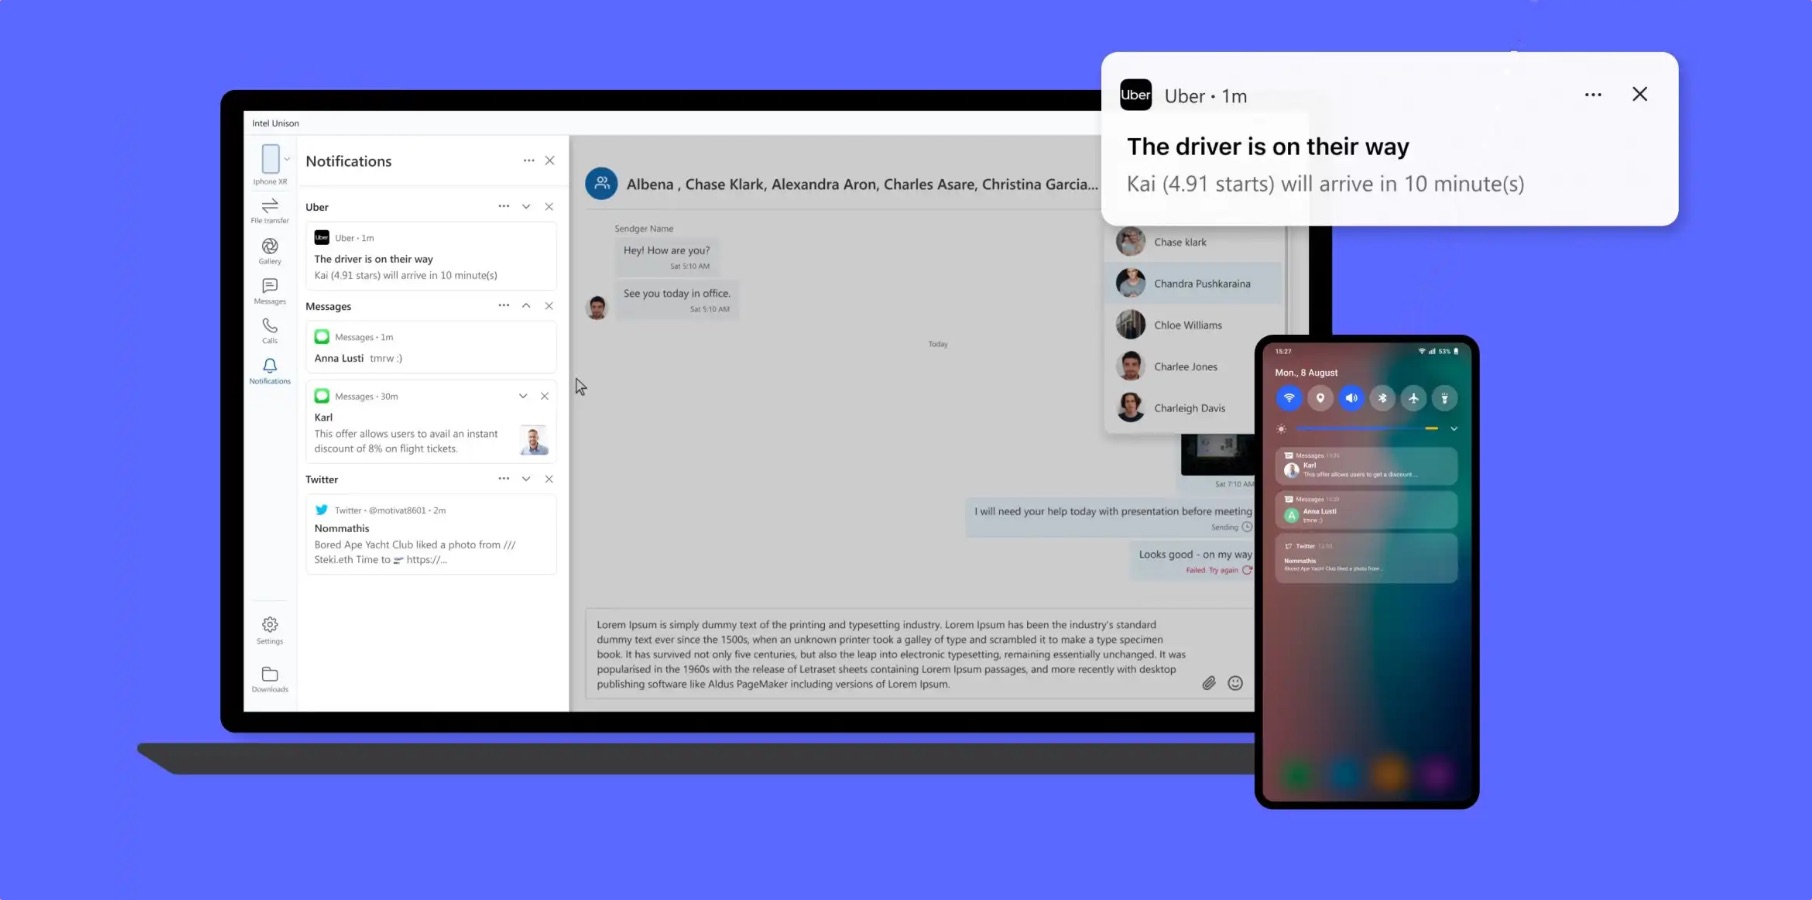 Here’s how to use iMessage on Windows 11 if you have an iPhone